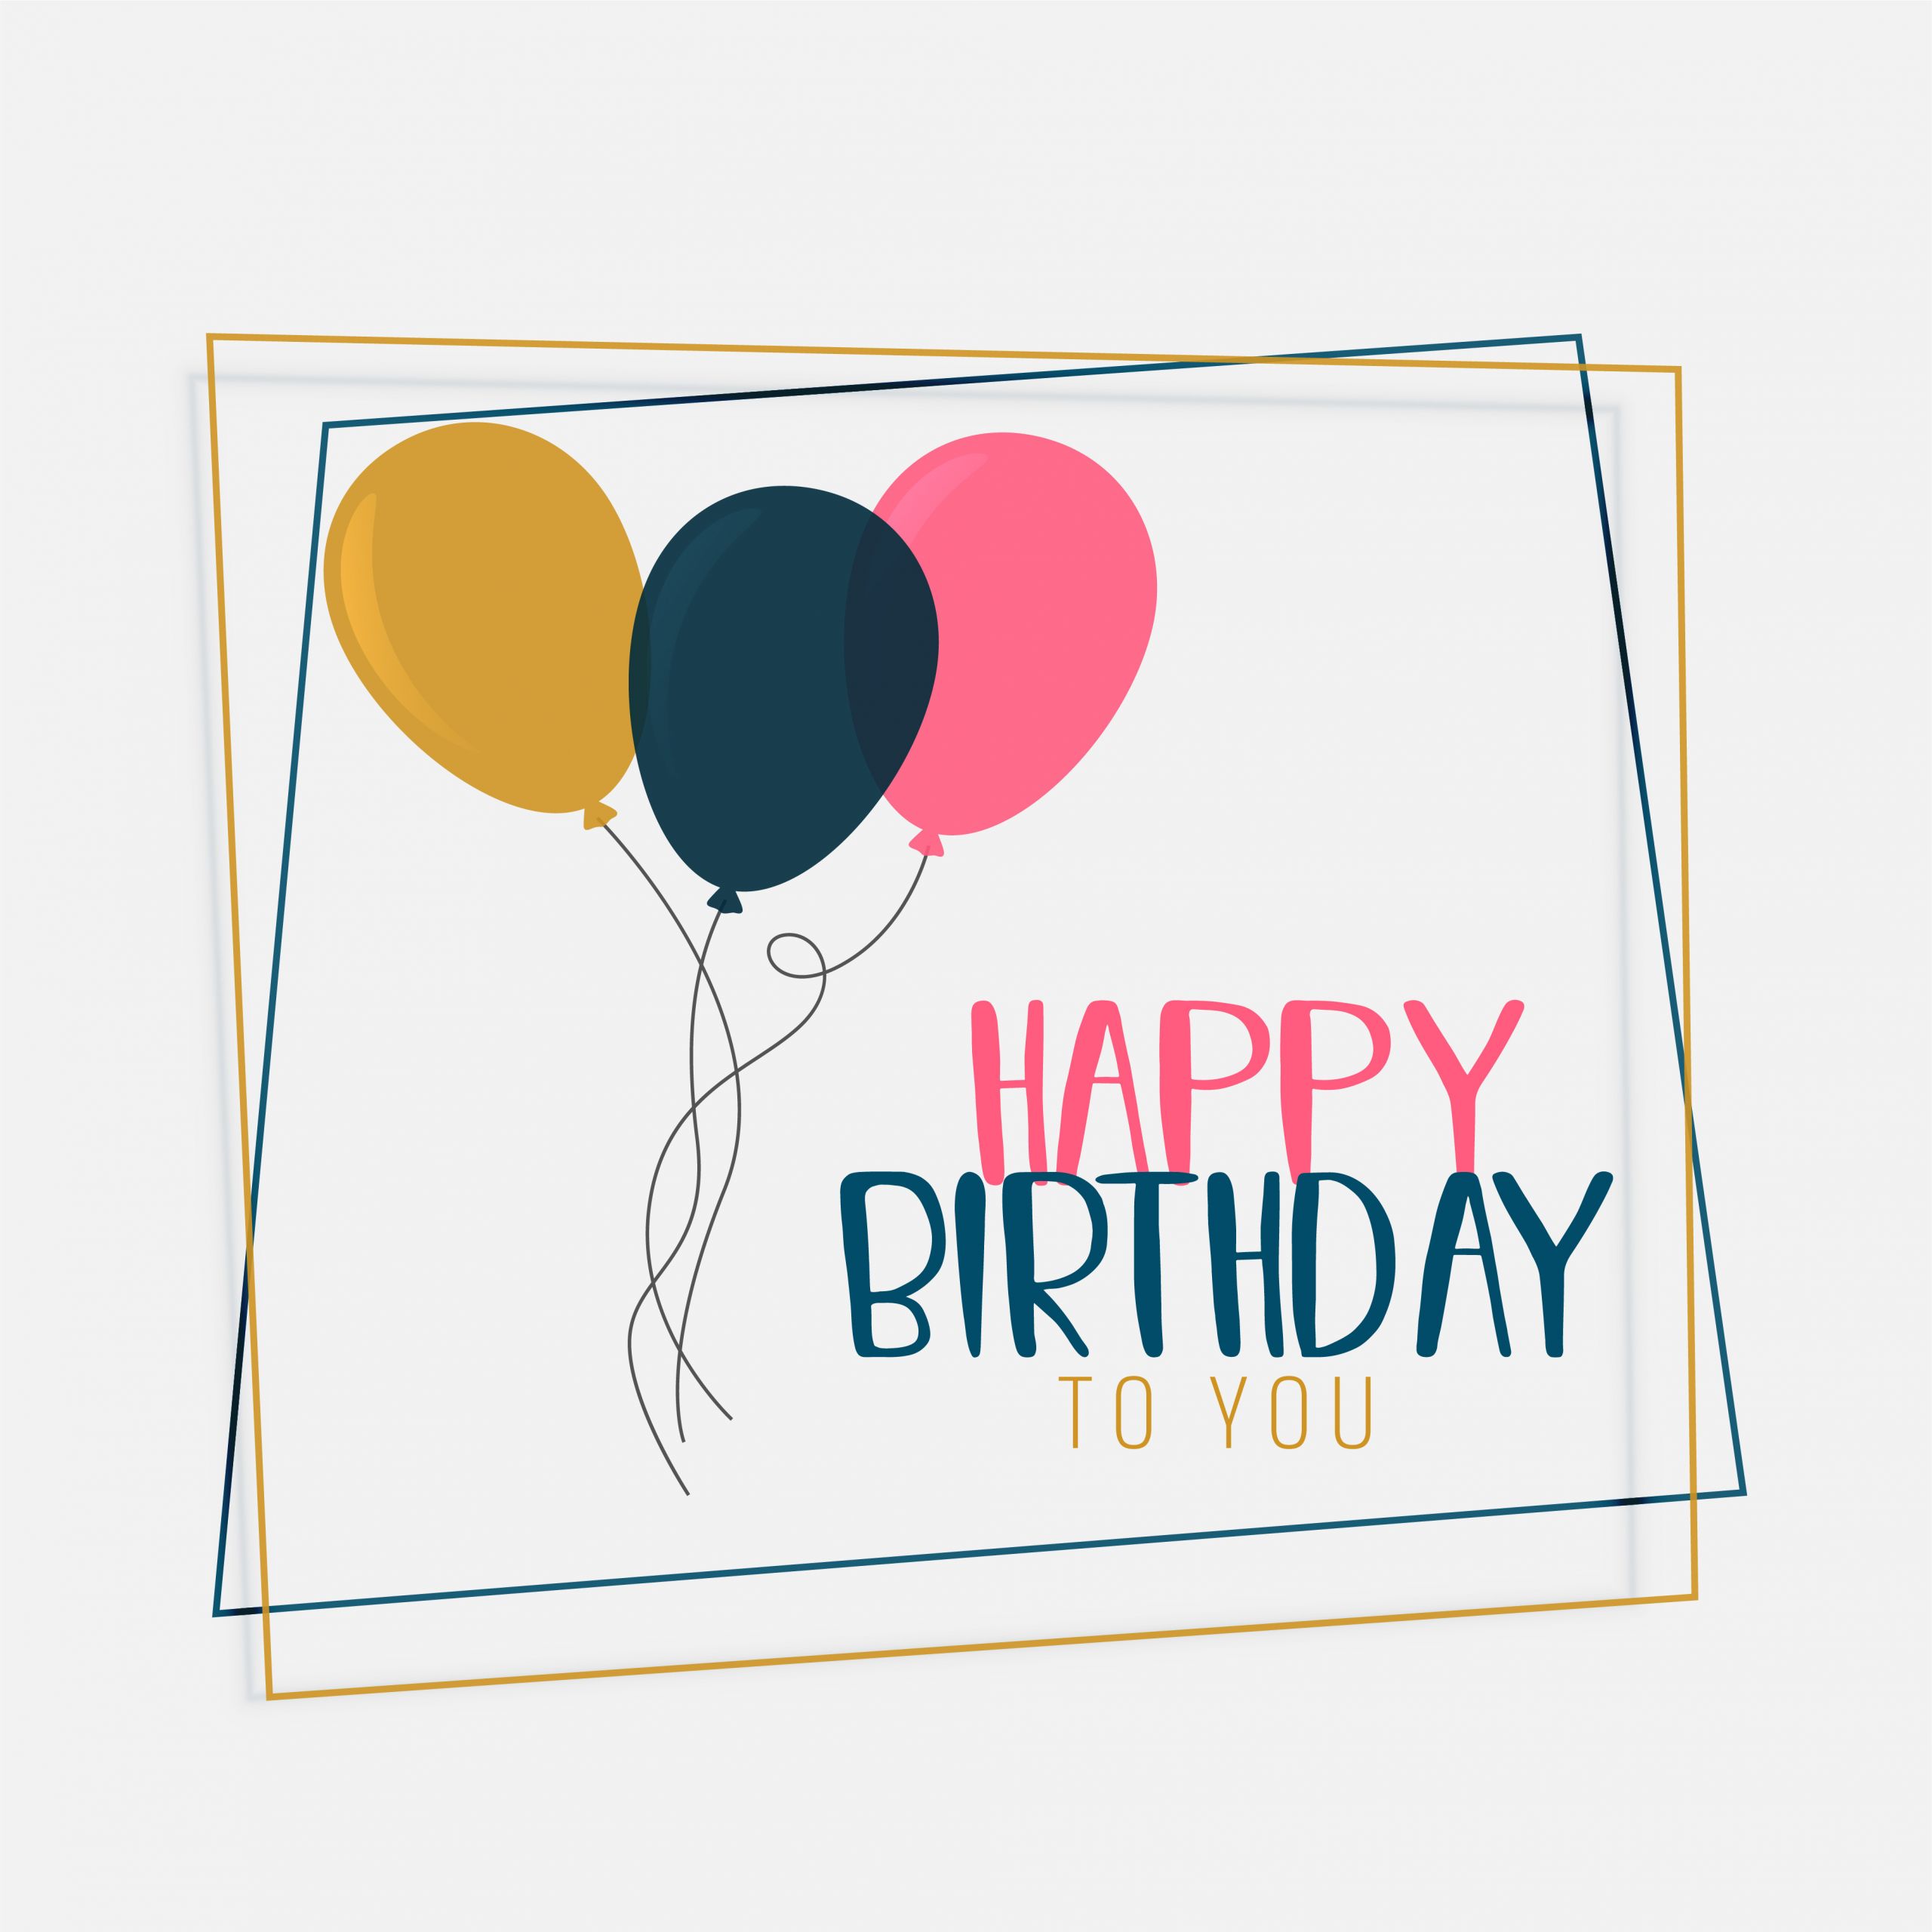 Design A Birthday Card
 happy birthday card design with flat color balloons